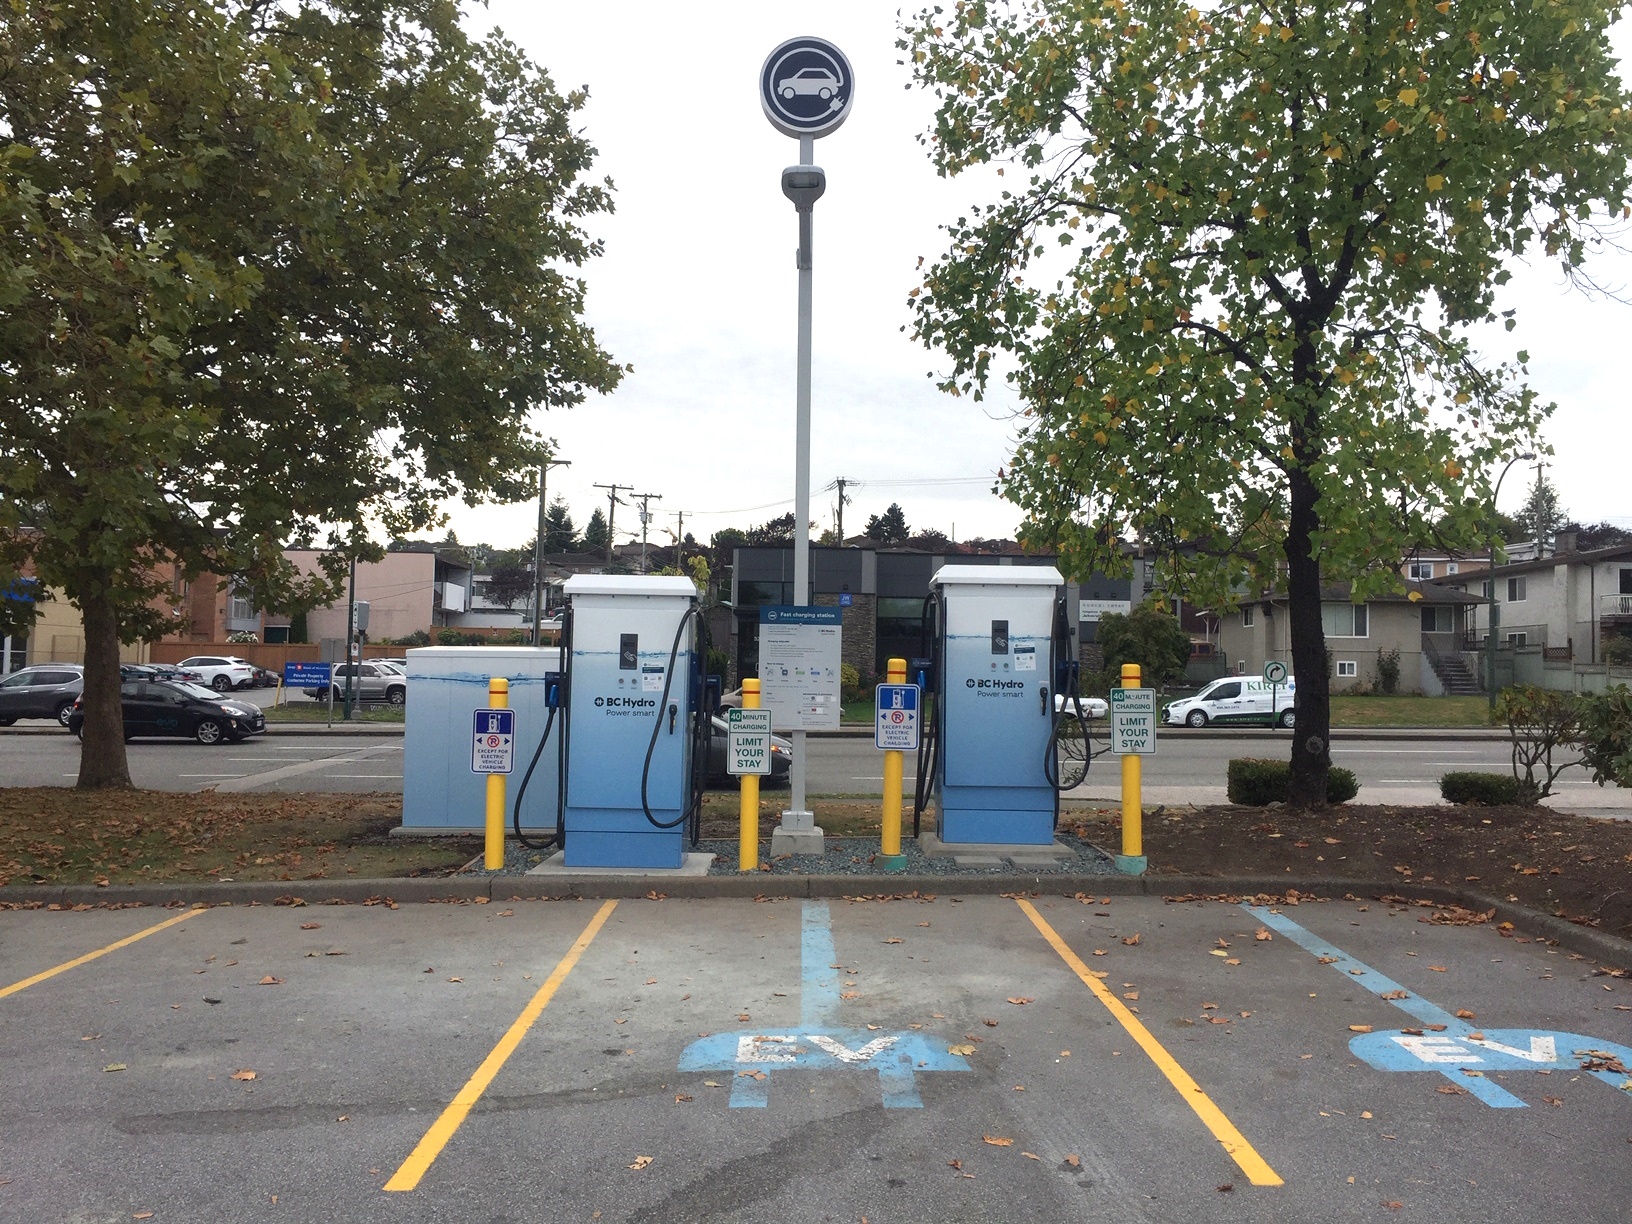 bc-hydro-vancouver-grandview-superstore-vancouver-bc-ev-station